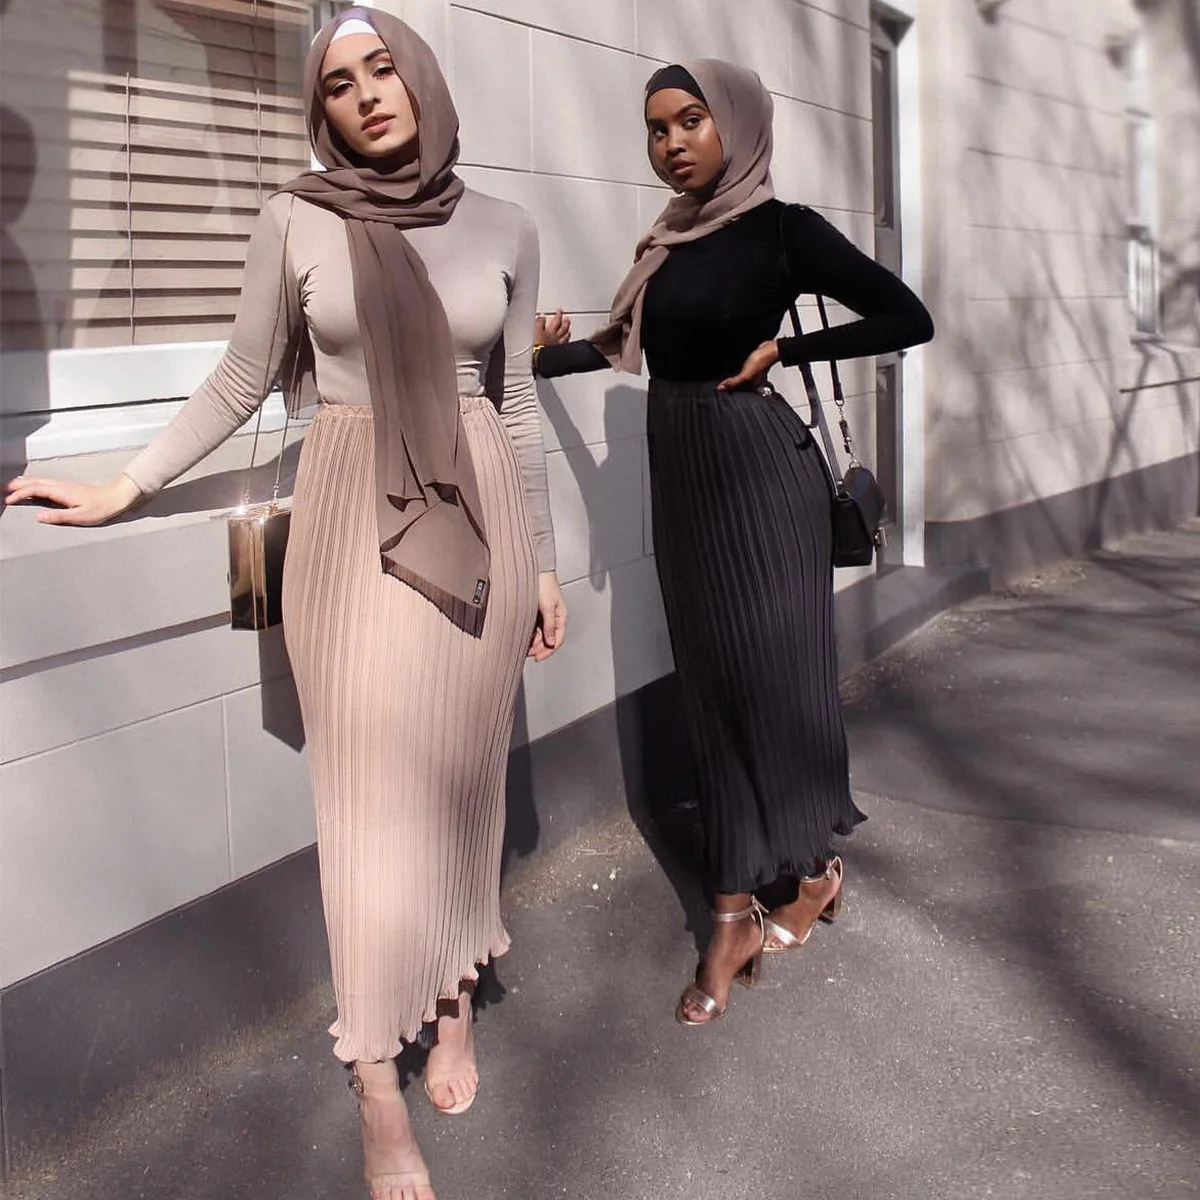 Chiffon Pleated Double-Layer Frill Maxi Skirt European American Solid Empire Pencil Skirts for Women arab muslim african skirt